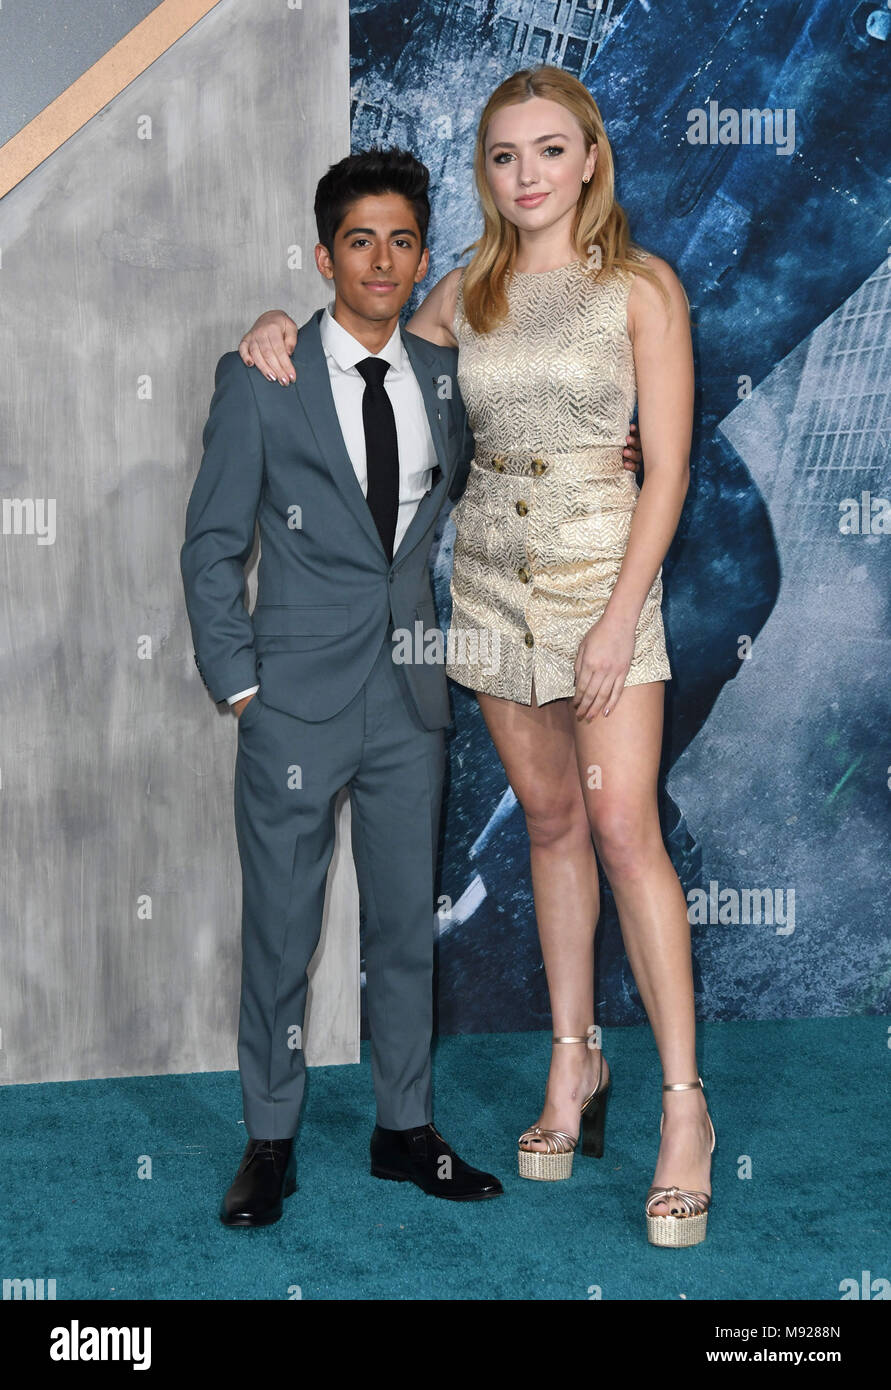 Hollywood, CA, USA. 21st Mar, 2018. 21 March 2018 - Hollywood, California - Karan  Brar, Peyton List. ''Pacific Rim Uprising'' Los Angeles Premiere held at  TCL Chinese Theatre IMAX. Photo Credit: Birdie